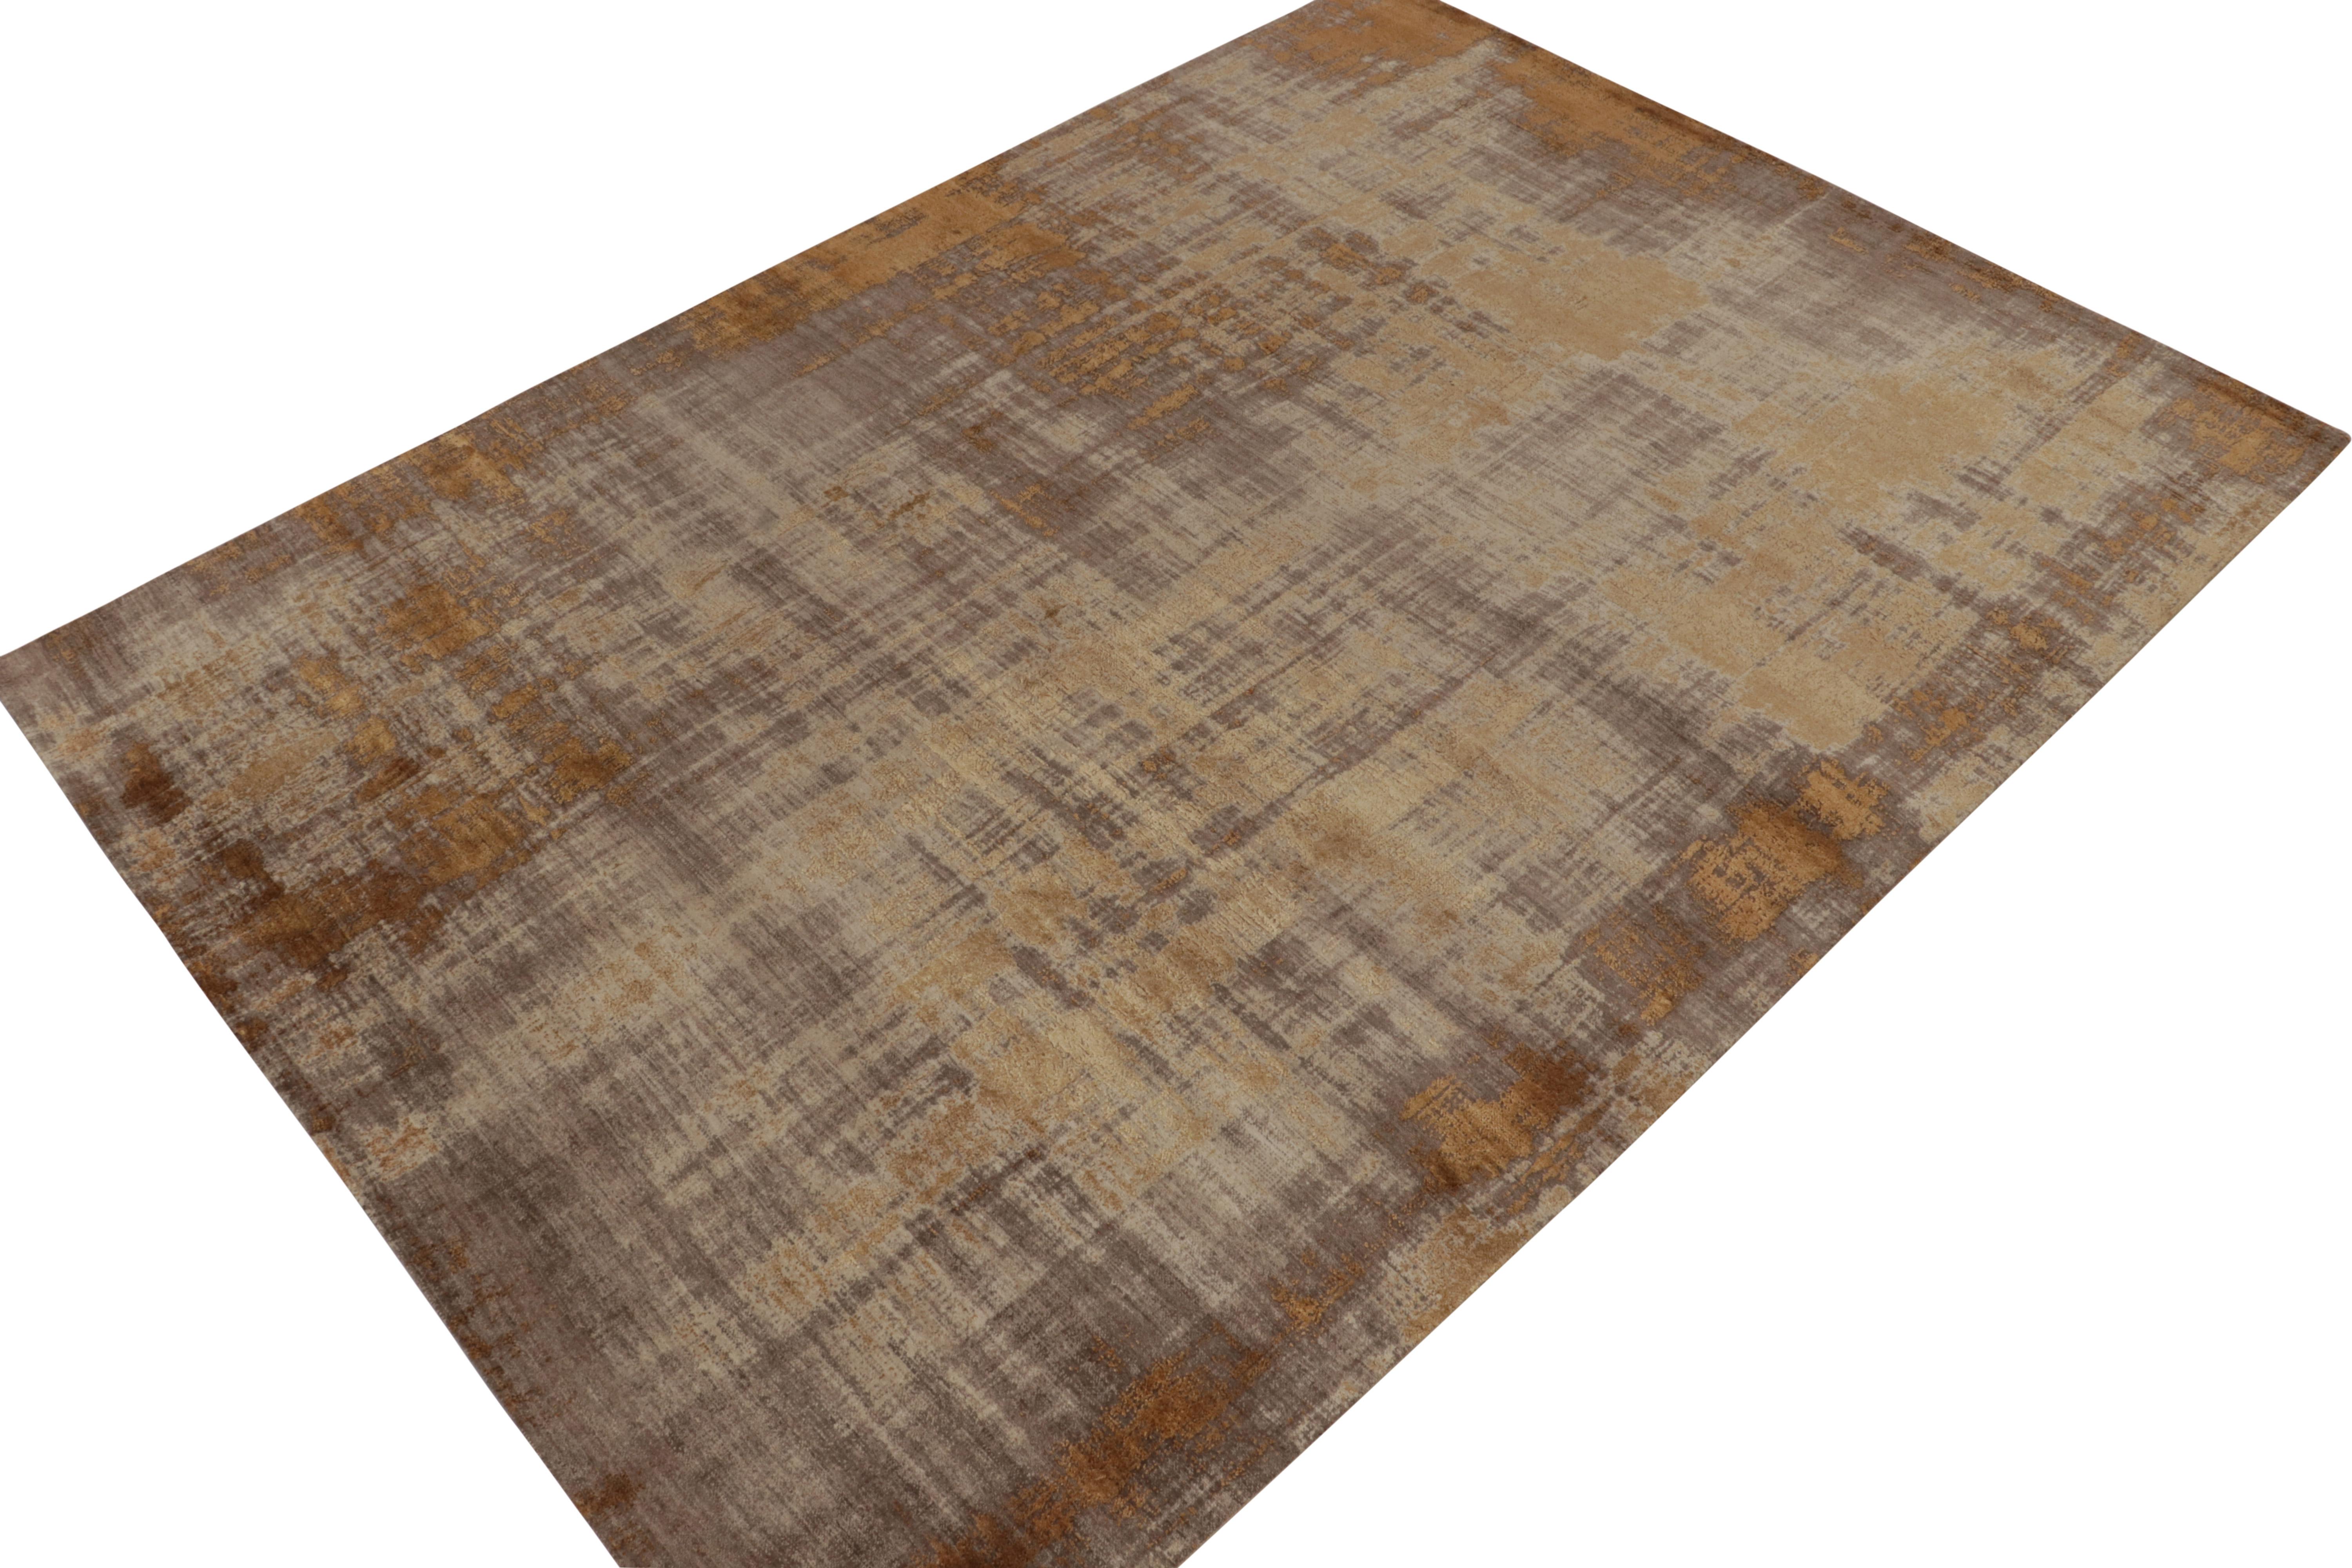 From Rug & Kilim’s boldest New & Modern selections, a 9x12 abstract rug hand-knotted in a luxurious wool & silk blend. 

The design exemplifies painterly sensibilities in geometry of regal tones, from copper brown to gold and gray. Keen eyes will